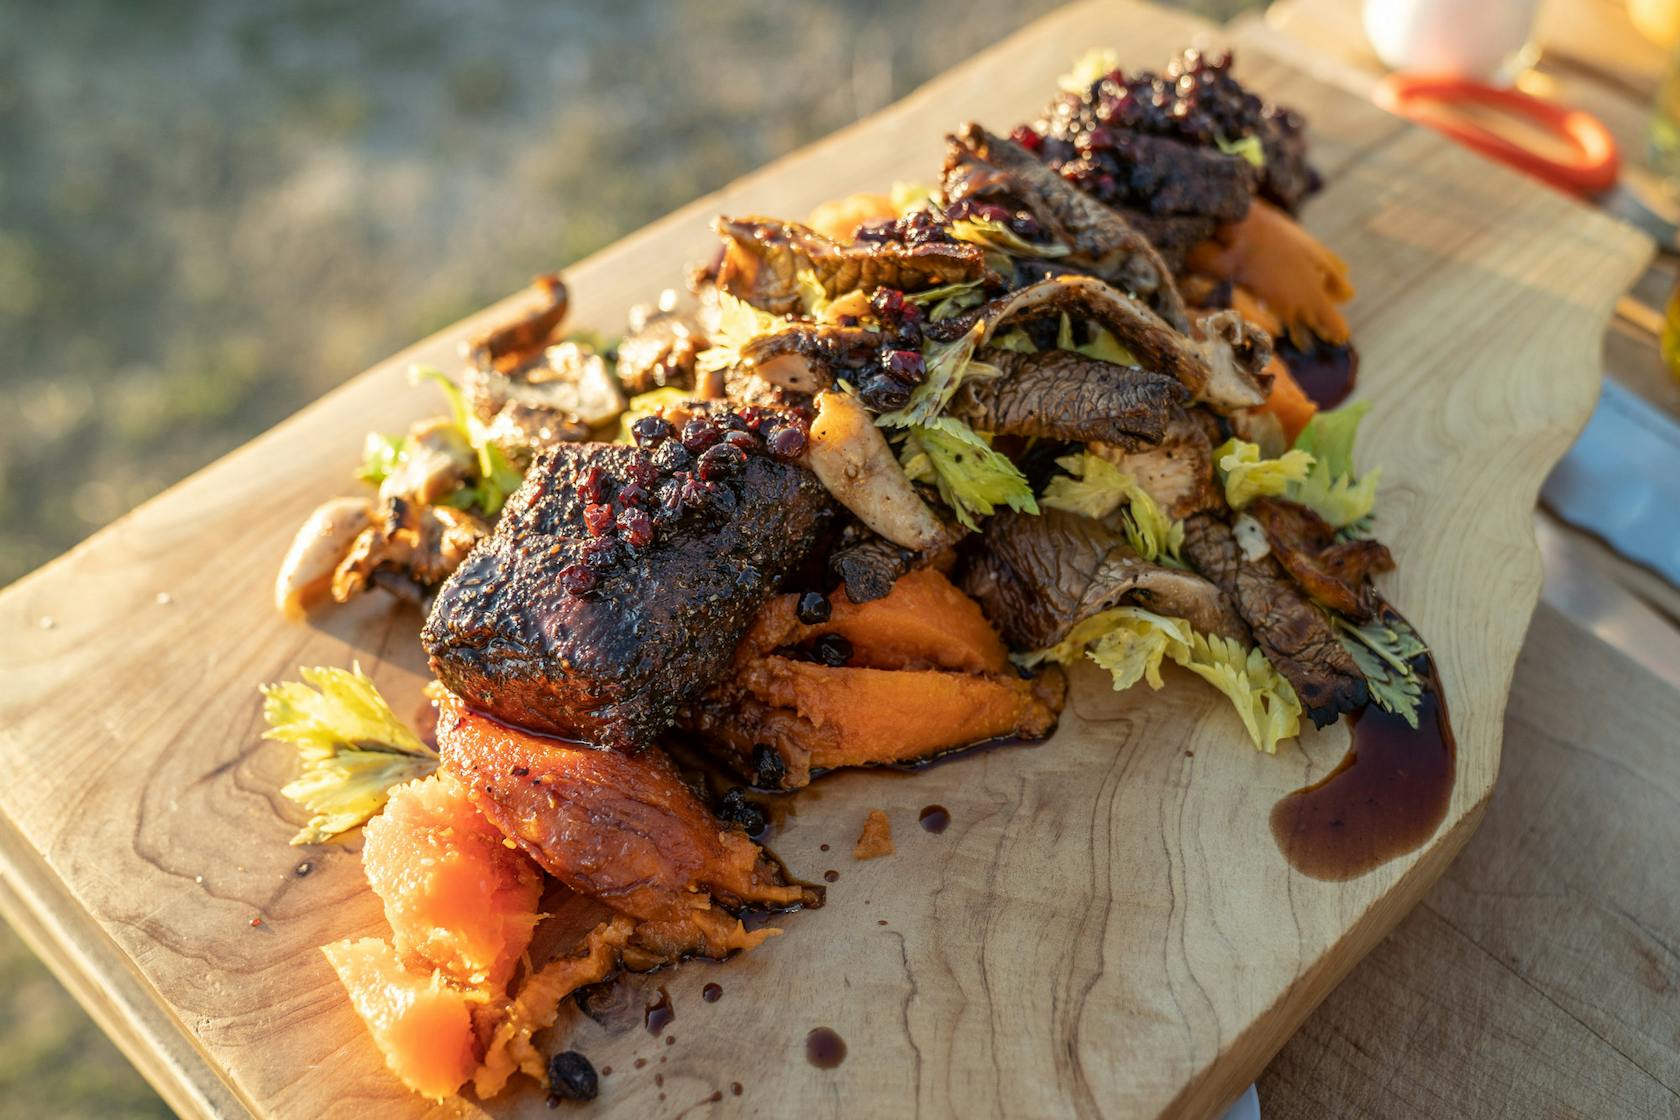 Grilled Elk Loin with Baked Sweet Potatoes and Grilled Wild Mushrooms